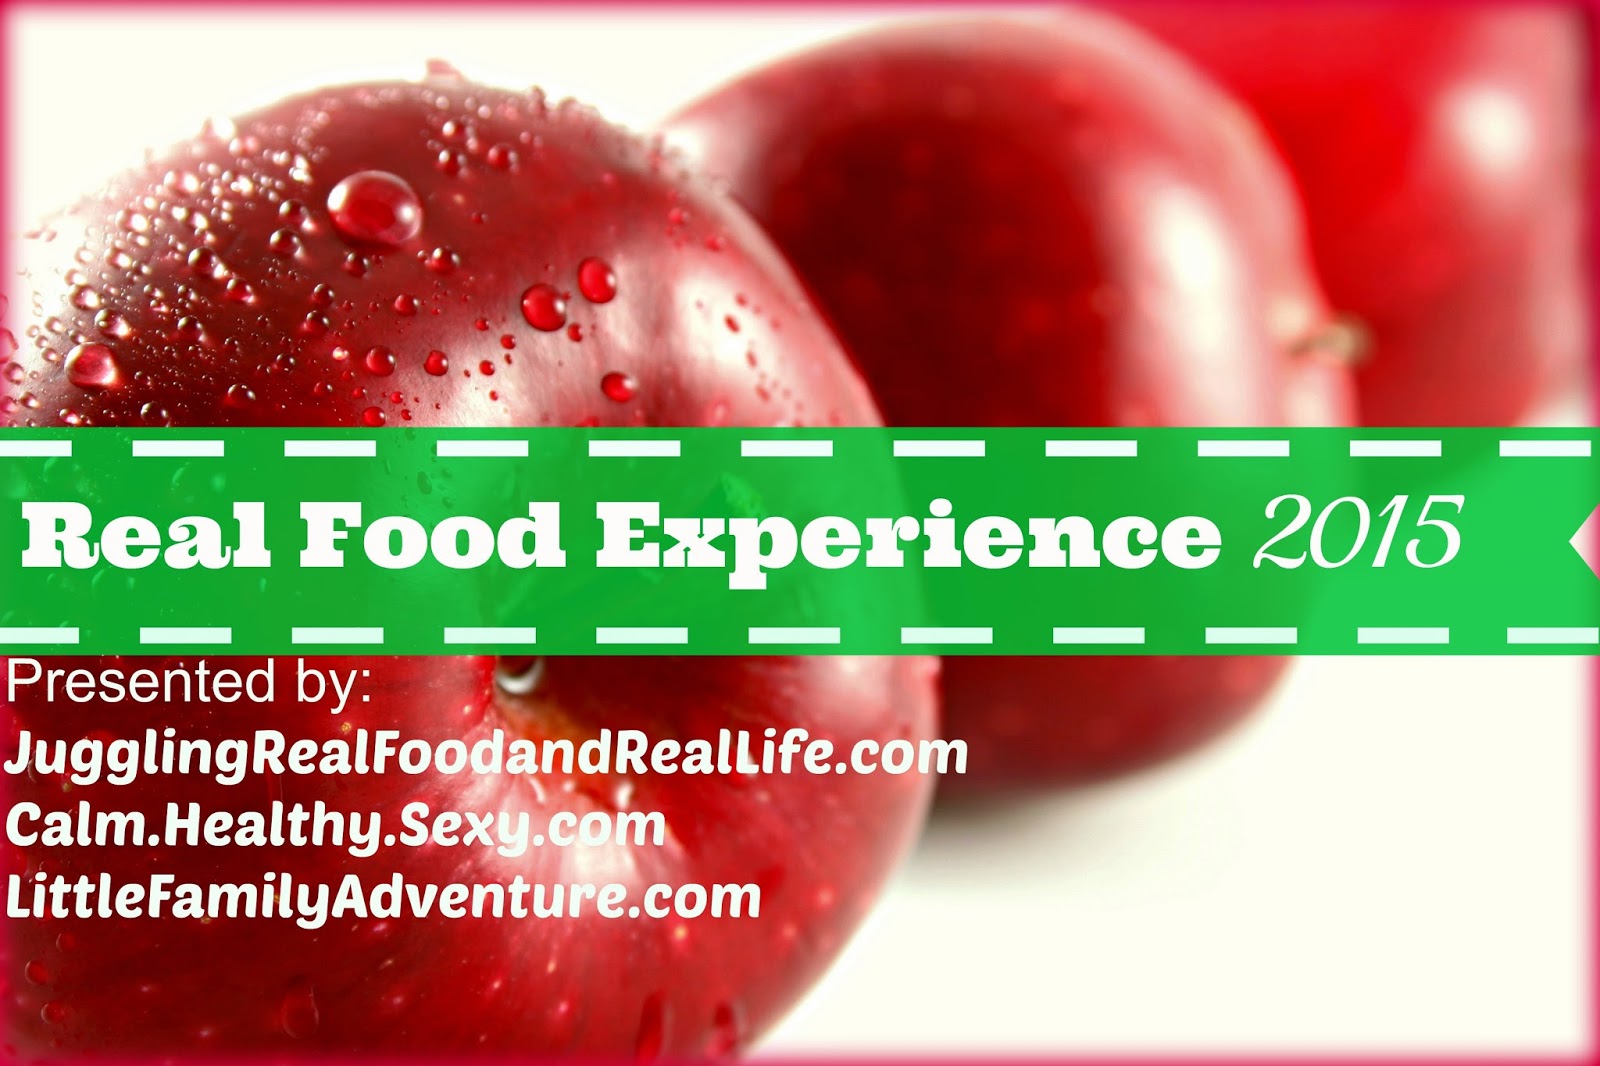 The Real Food Experience 2015